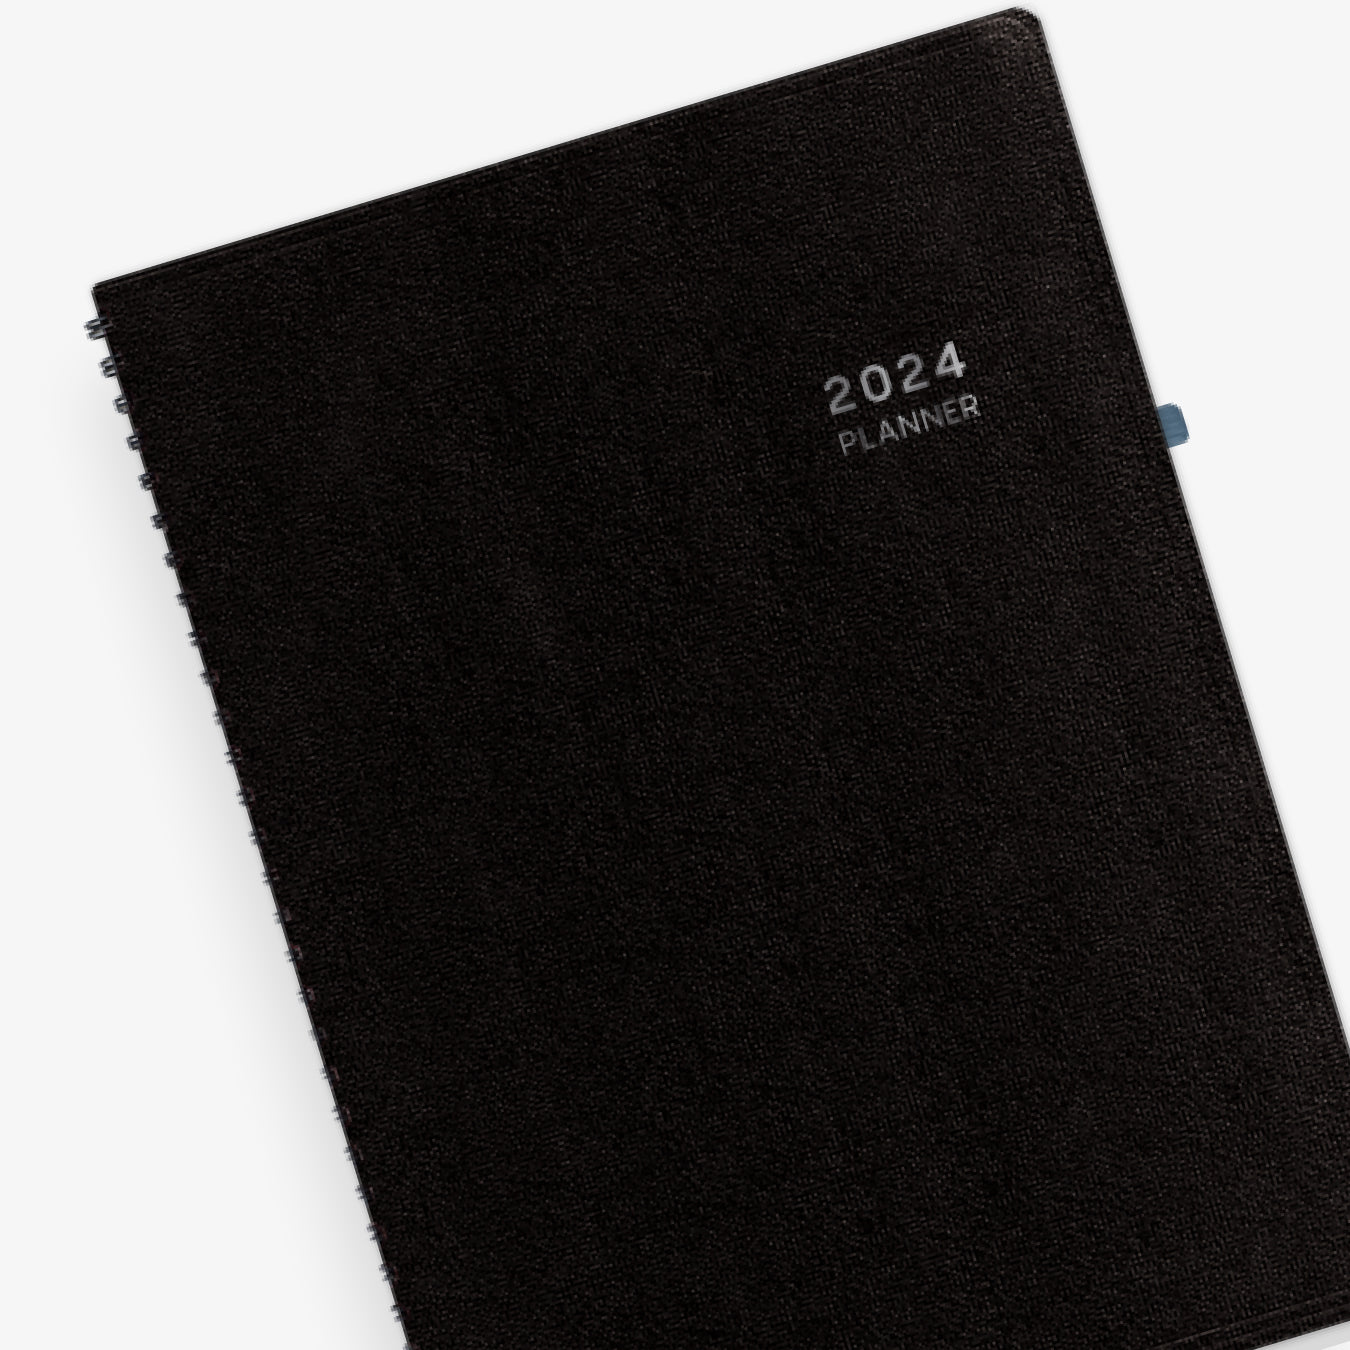 Classy and executive black pajco lexide cover for this 2024monthly planner notes in 5.875 x 8.625 size from Blue Sky